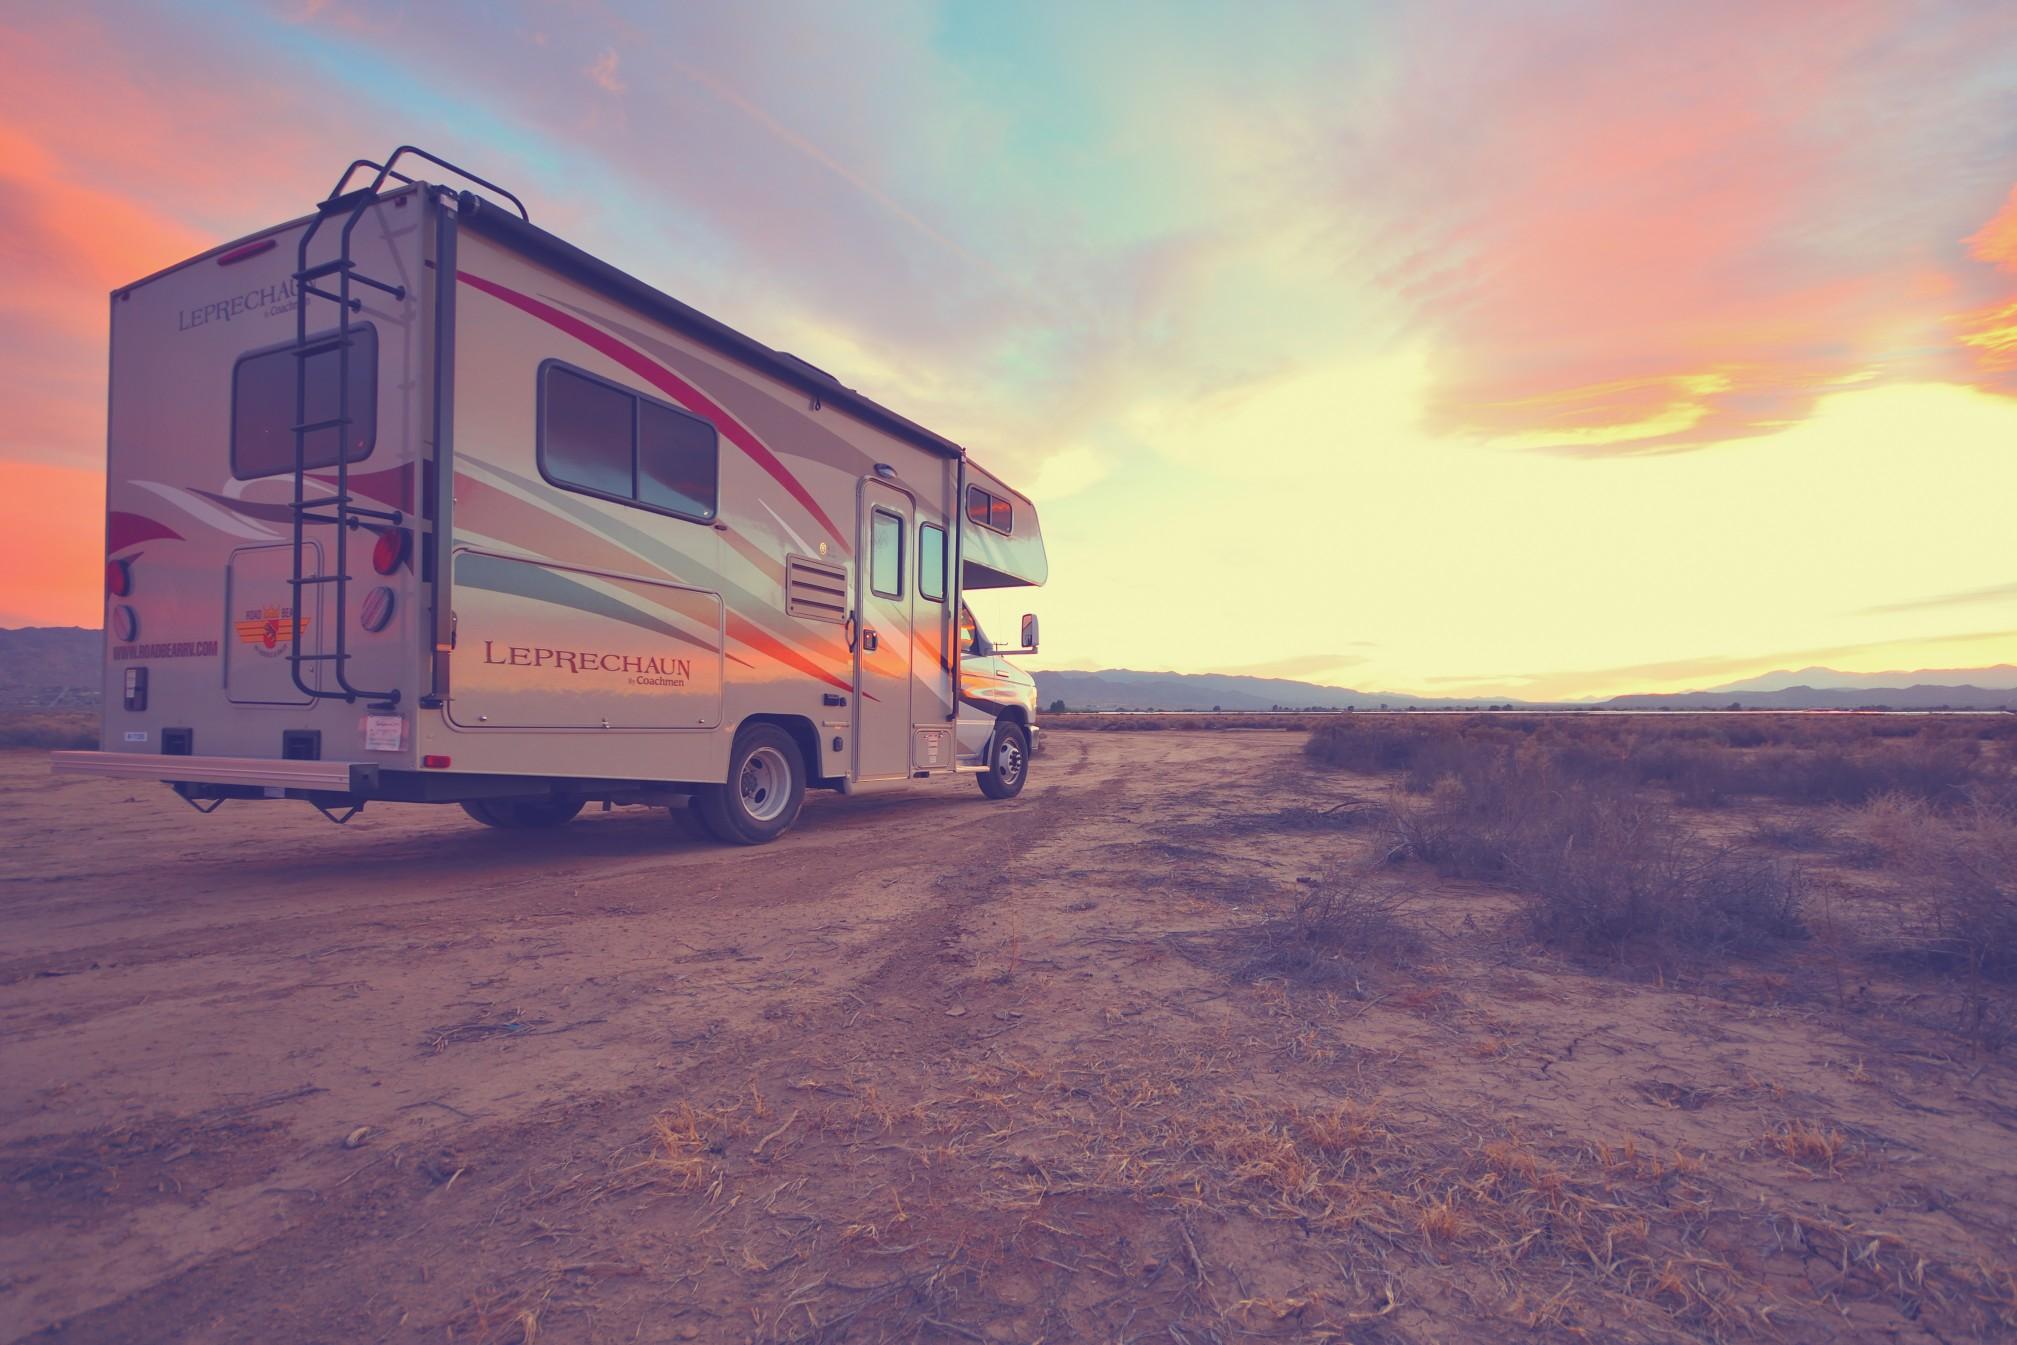 Working from an RV means you can travel anywhere.